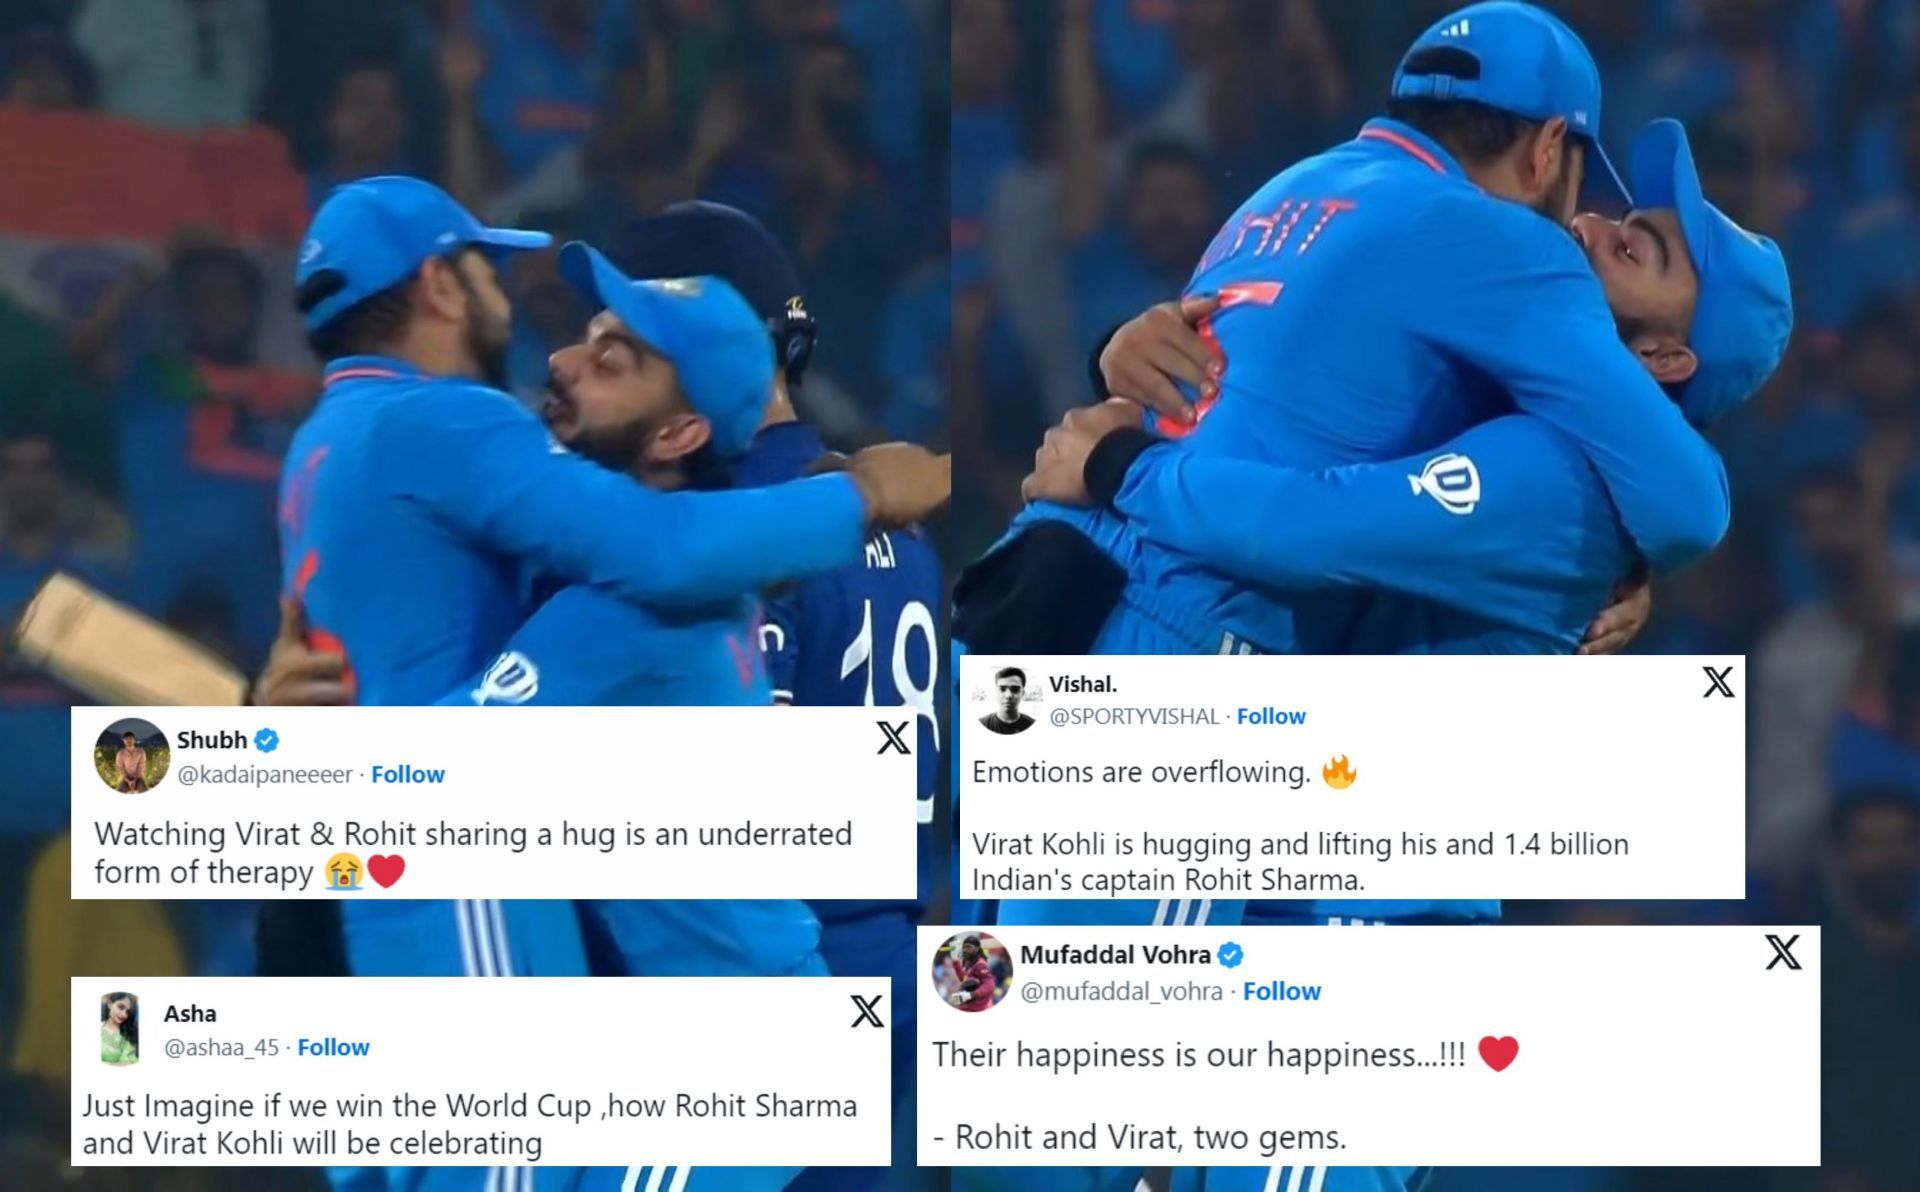 Virat Kohli and Rohit Sharma celebrating after the fall of a wicket on Sunday in the match against England..